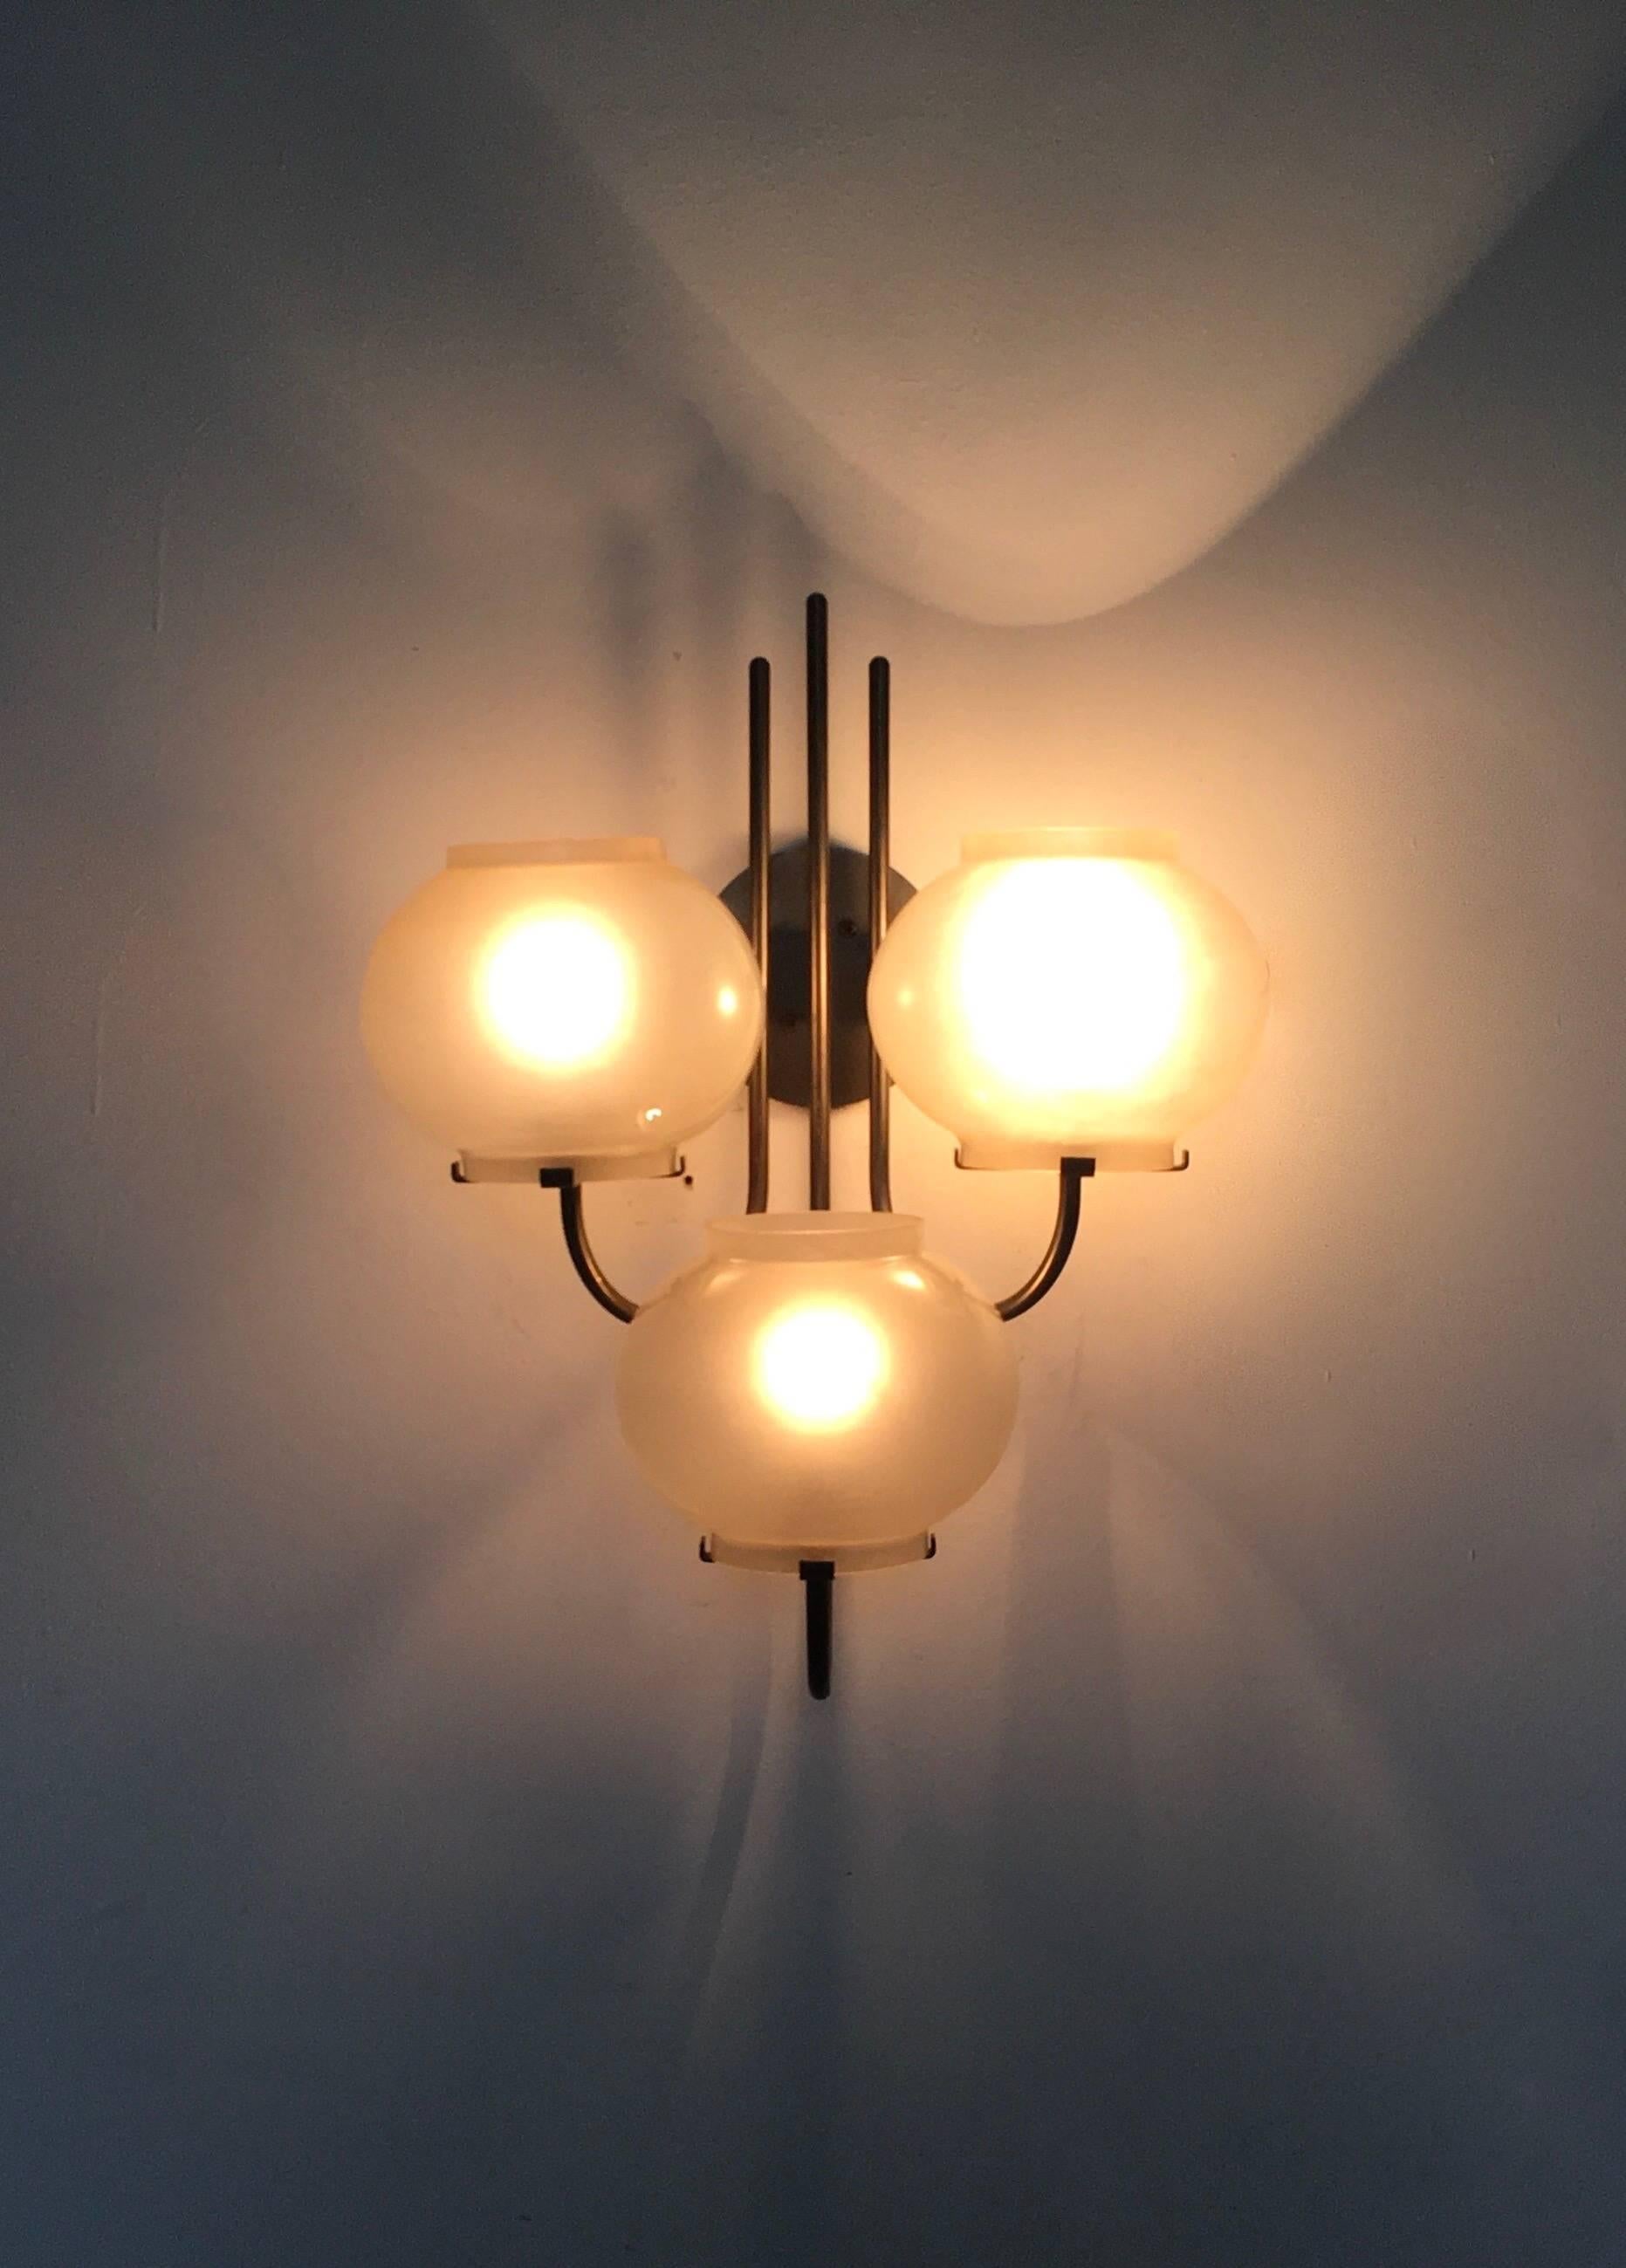 Pair of Sconces in the Style of Gino Sarfatti for Arteluce, Italy, 1960s (Mitte des 20. Jahrhunderts)